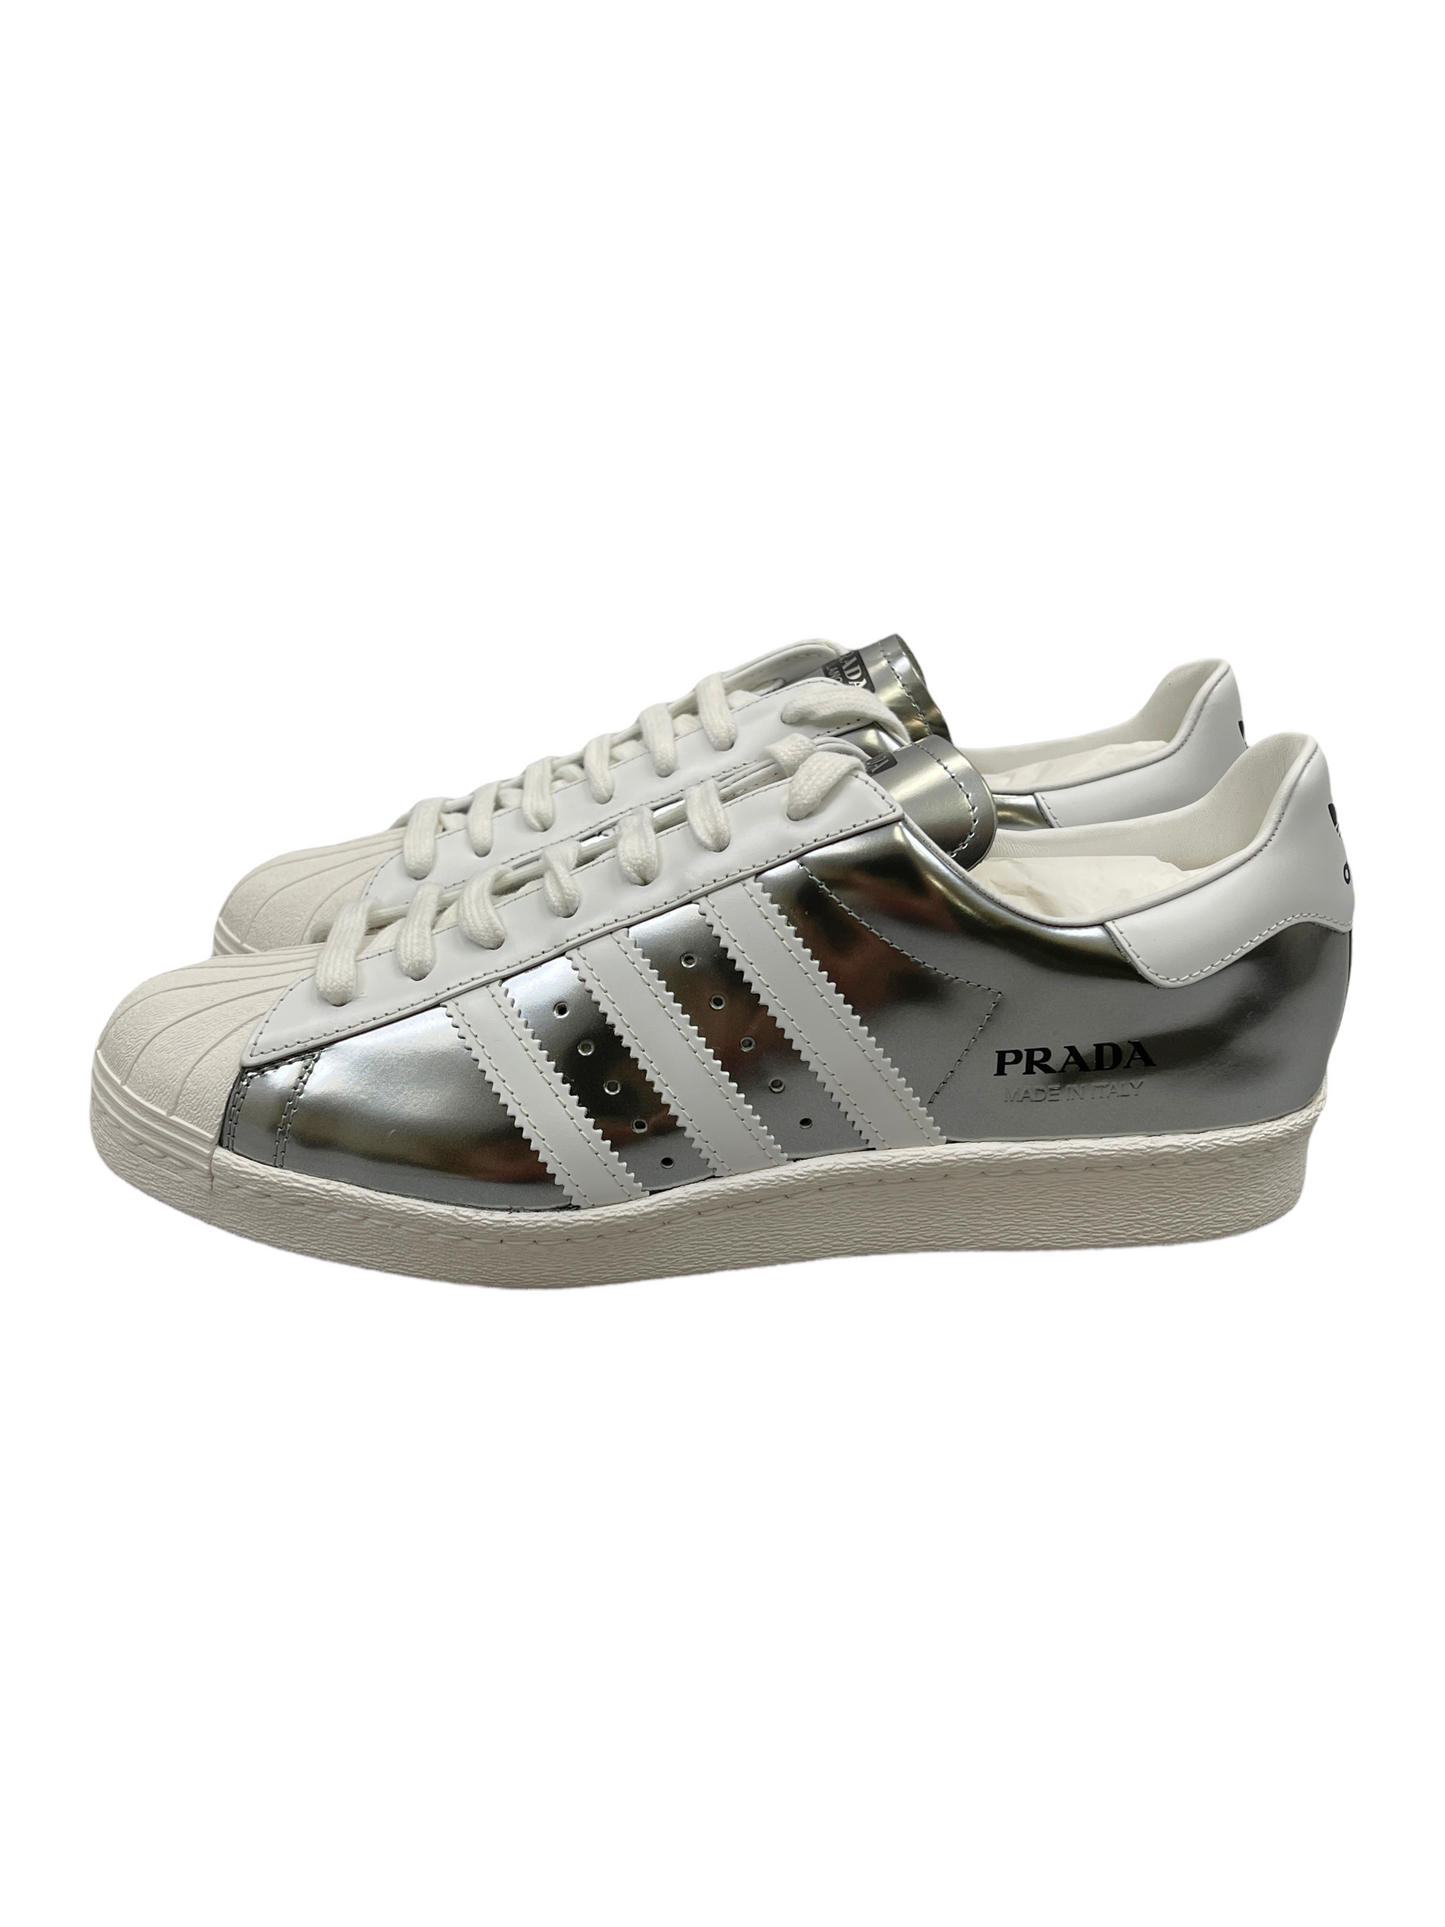 Adidas x Prada Superstar Silver 9.5 US - Genuine Design Luxury Consignment for Men. New & Pre-Owned Clothing, Shoes, & Accessories. Calgary, Canada